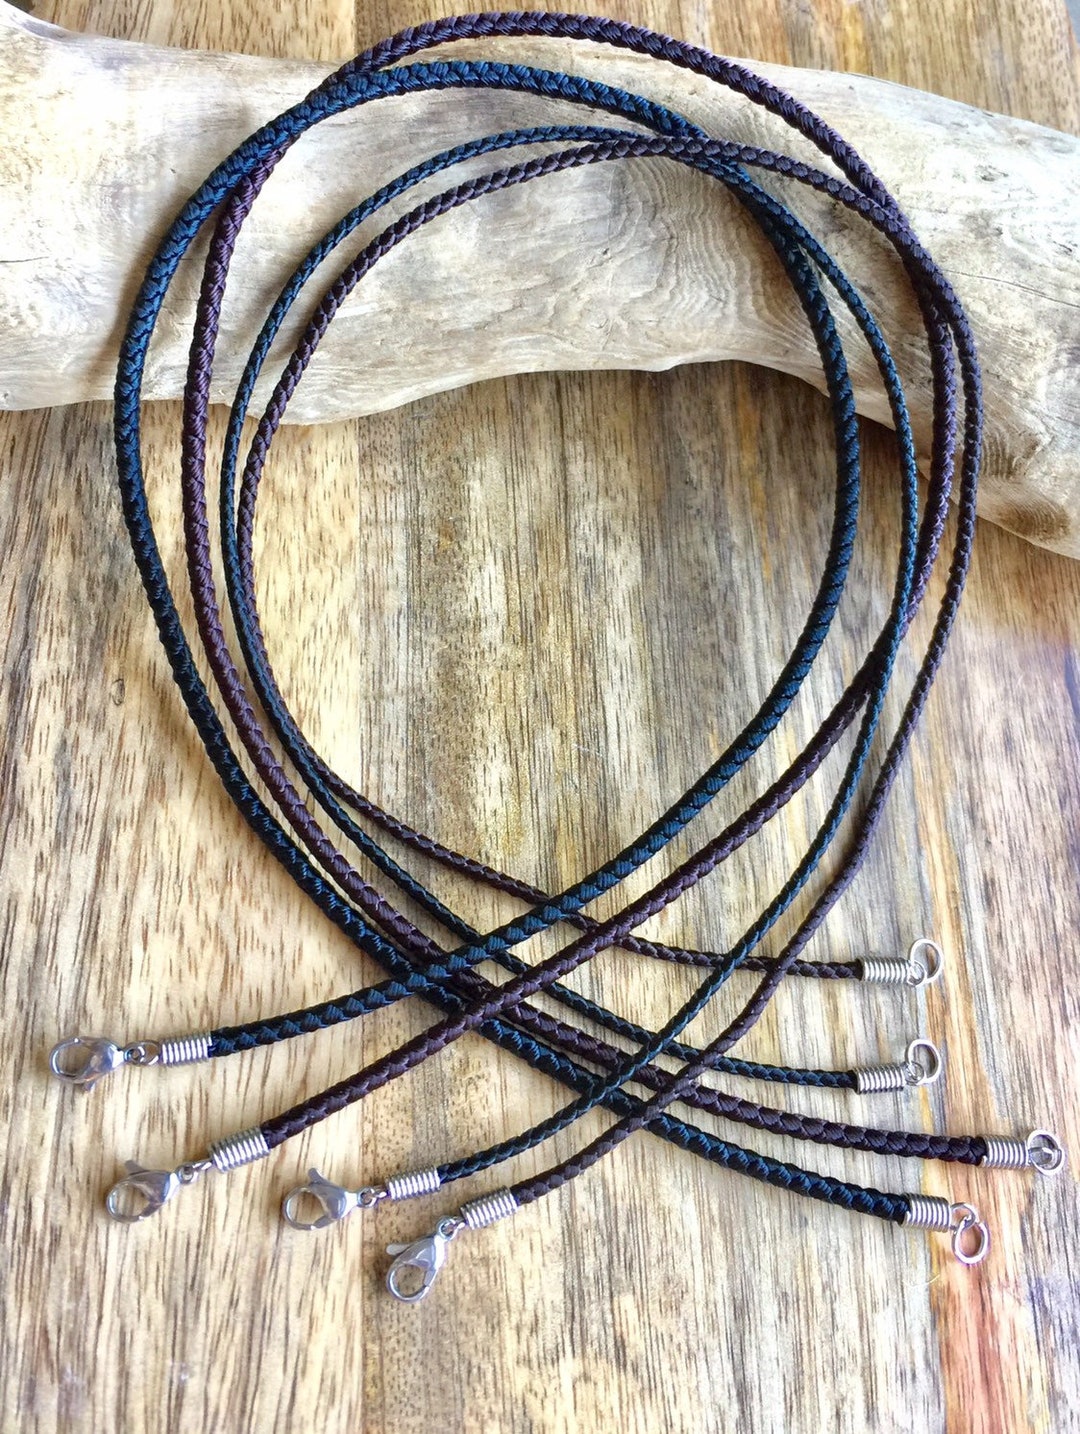 Surfer Necklace Men, Adjustable Cord Necklace, Wax Cord Necklace,  Waterproof Necklace, Black Cord Necklace, Matching Necklace, String Cord 